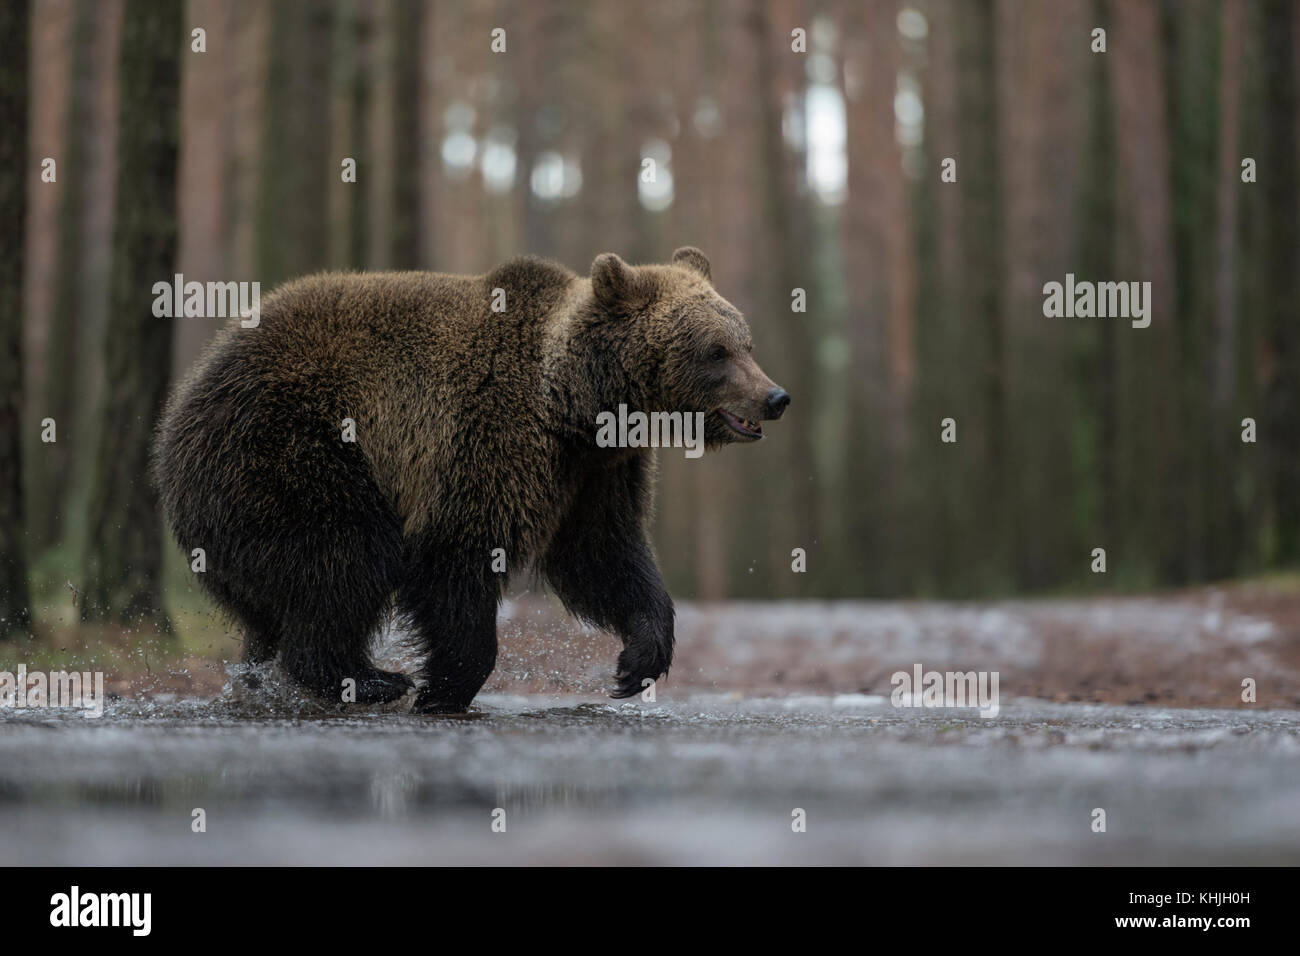 Eurasian Brown Bear ( Ursus arctos ) on its way through a frozen puddle, running, in a hurry, crossing a forest road, in winter, looks funny, Europe. Stock Photo